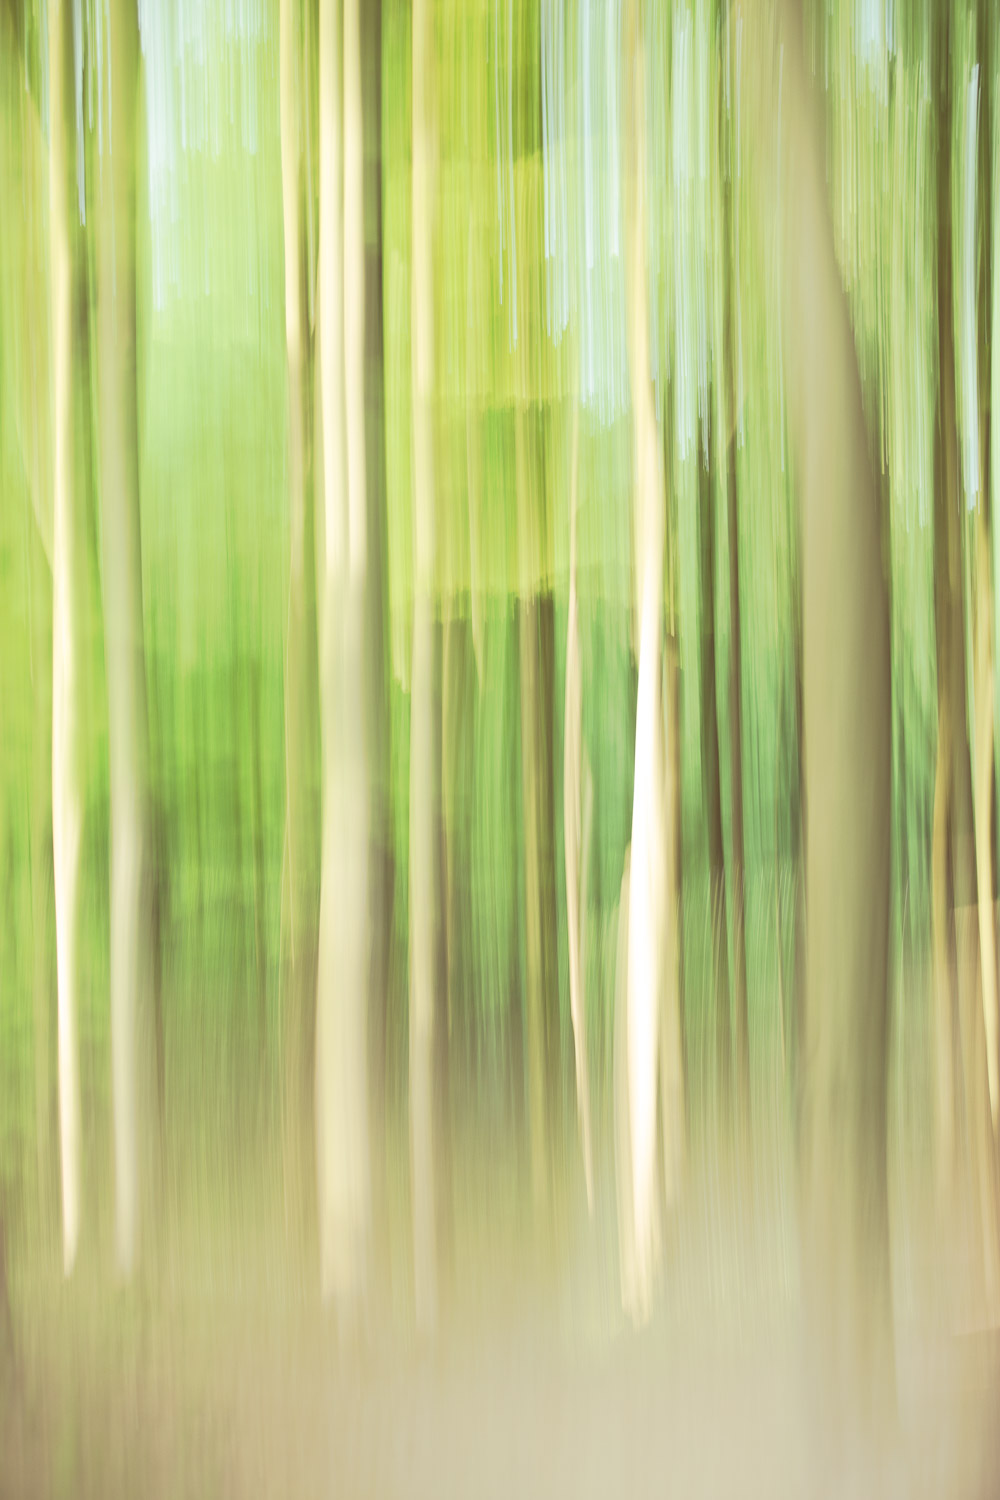 Moving Moments beach forest by Karen Ketels